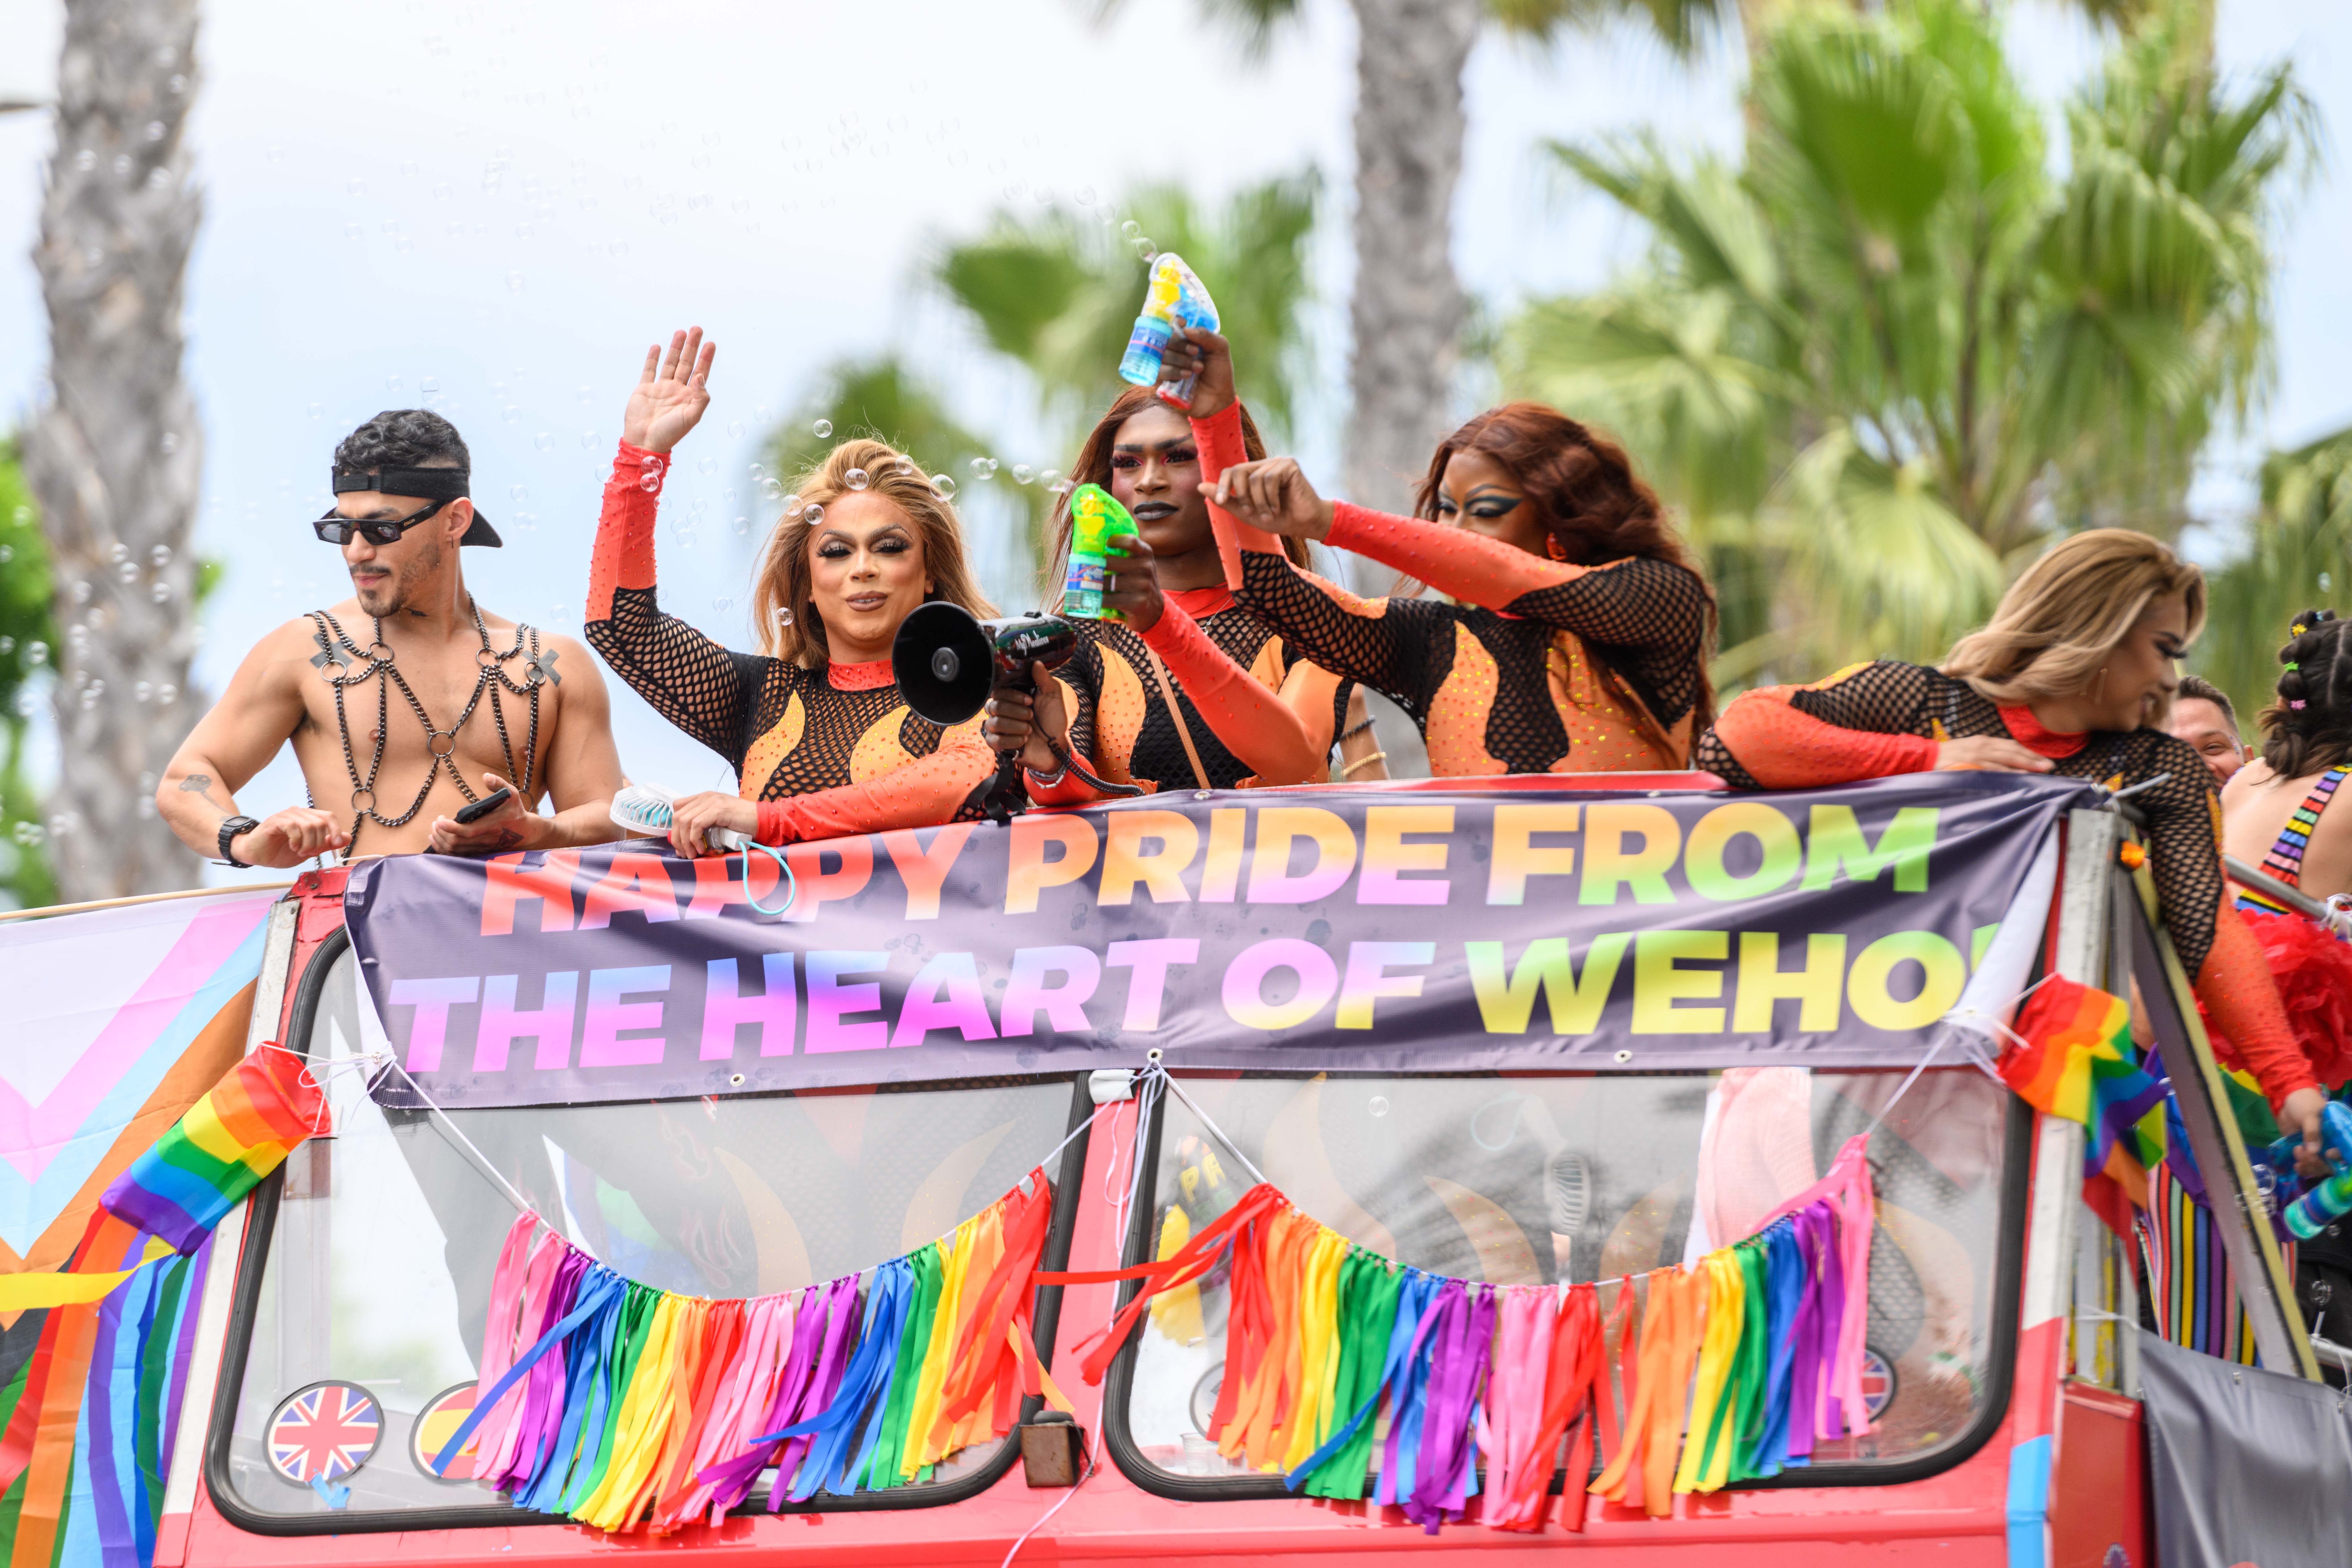 At WeHo Pride Parade, attendees express support for LGBTQ+ community